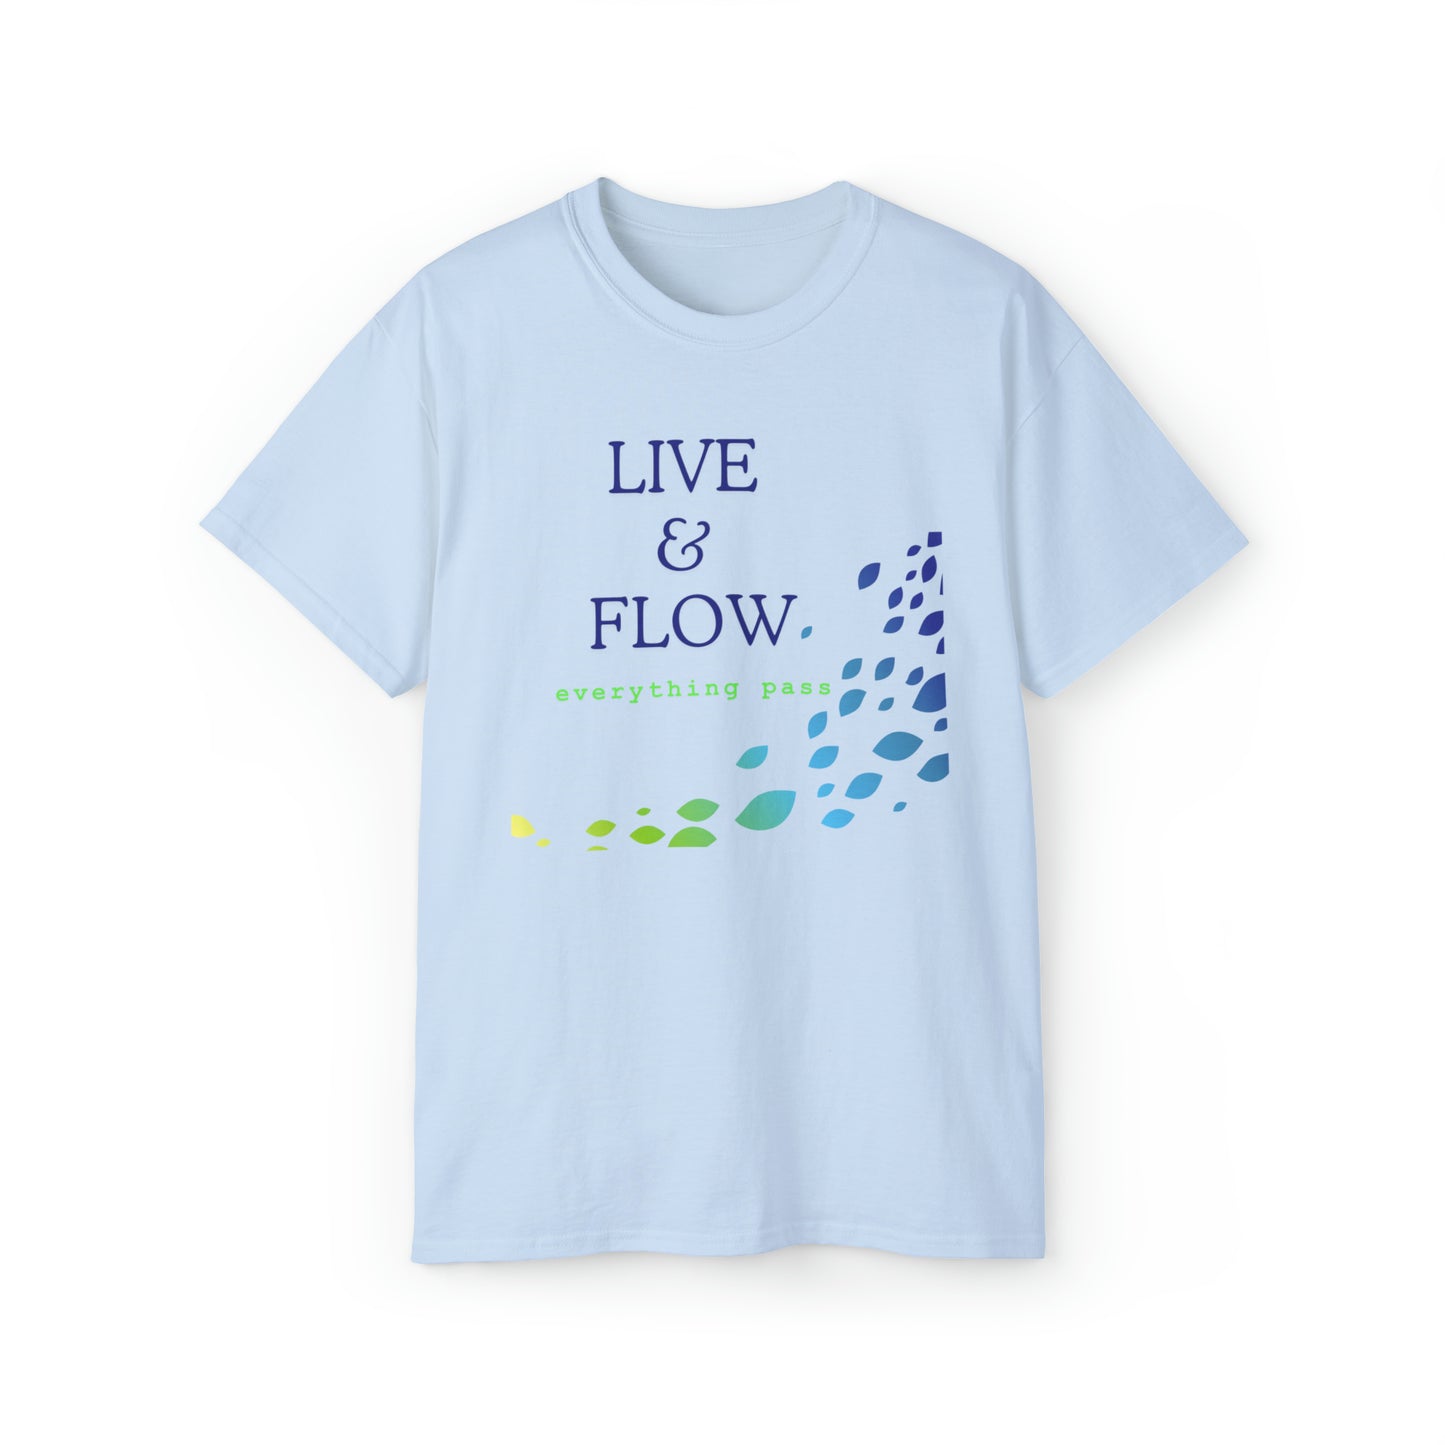 Unisex Ultra Cotton Tee - Life is motion - Live & Flow "everything pass"